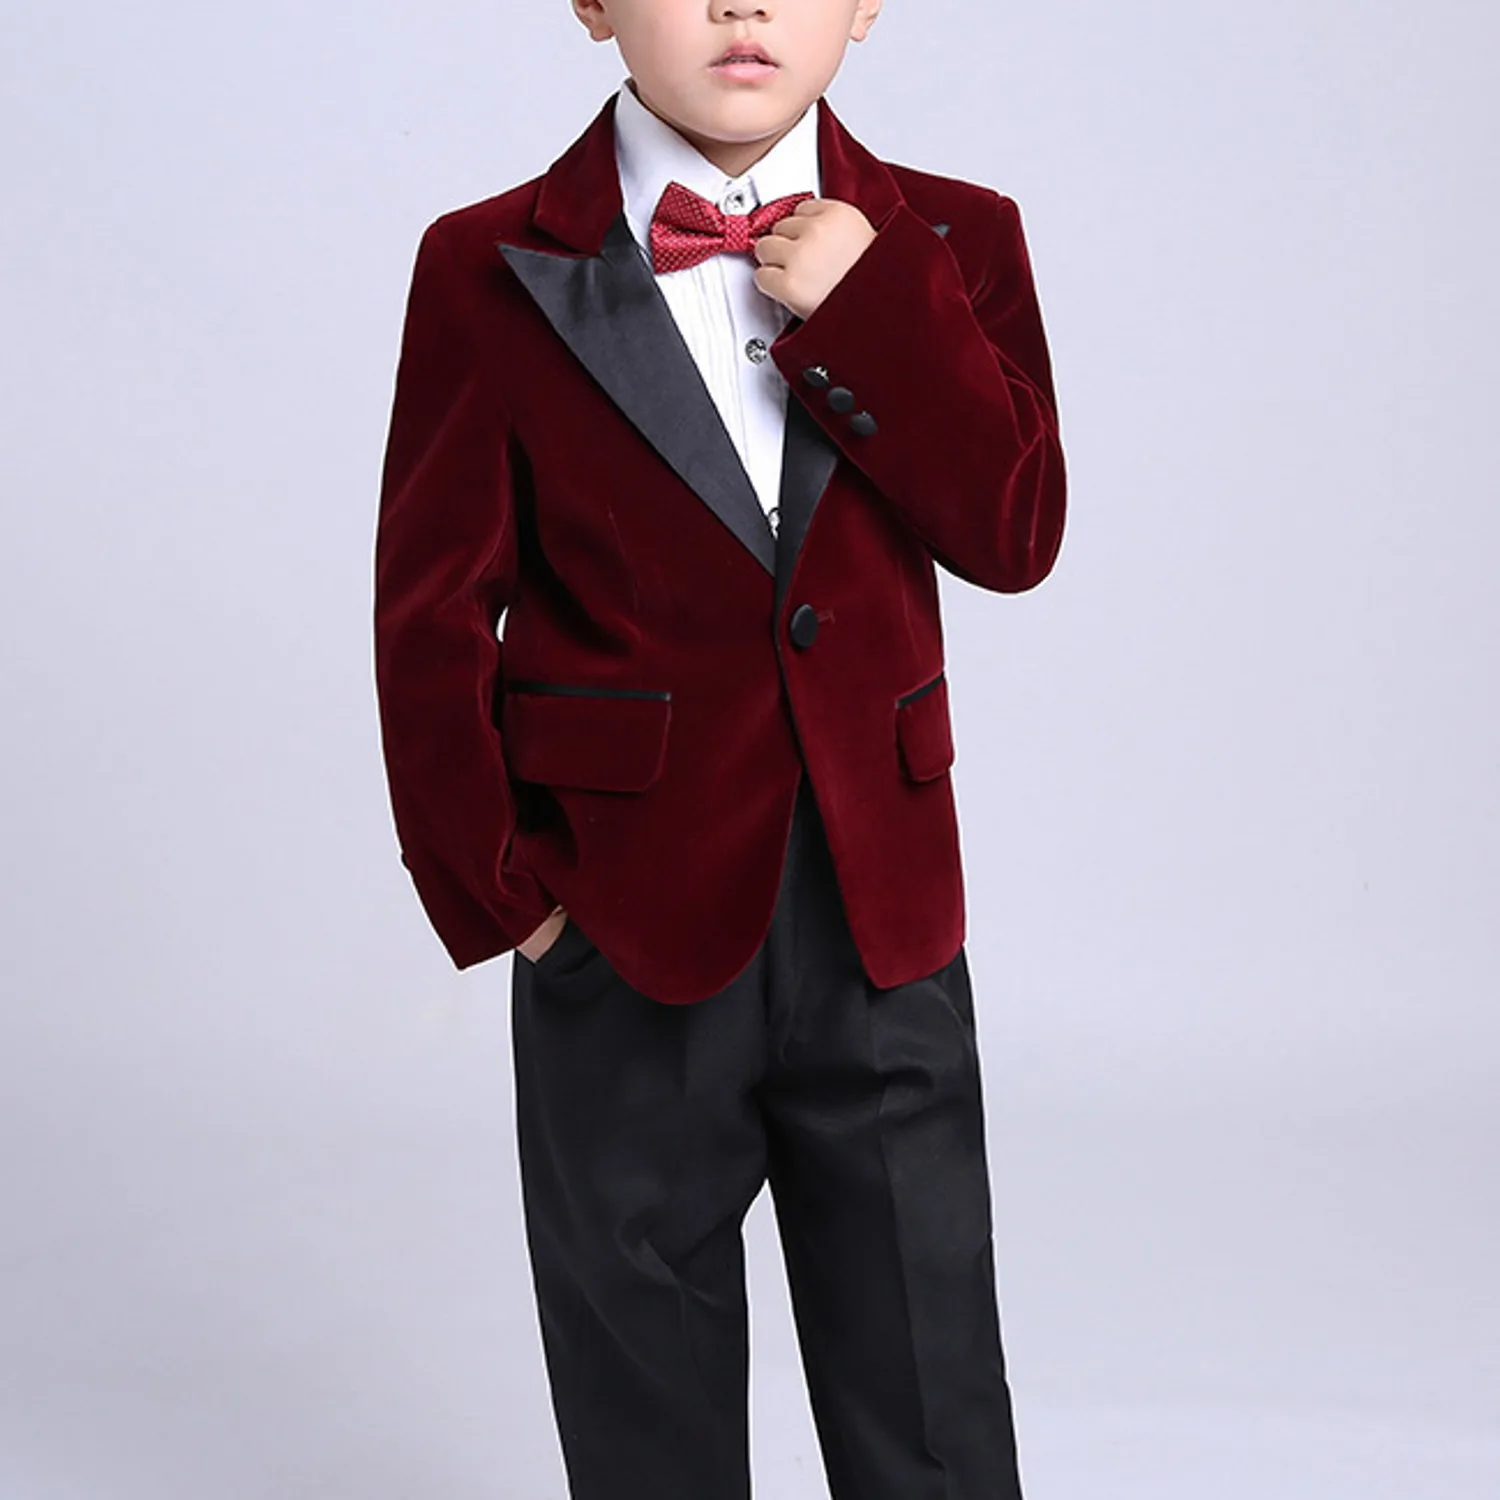 Green Velvet Boys Suits For Wedding Clothing Kids Birthday Party Formal Outfits Sets Ring Bearer Attire  (Jacket +Pants+Bow)